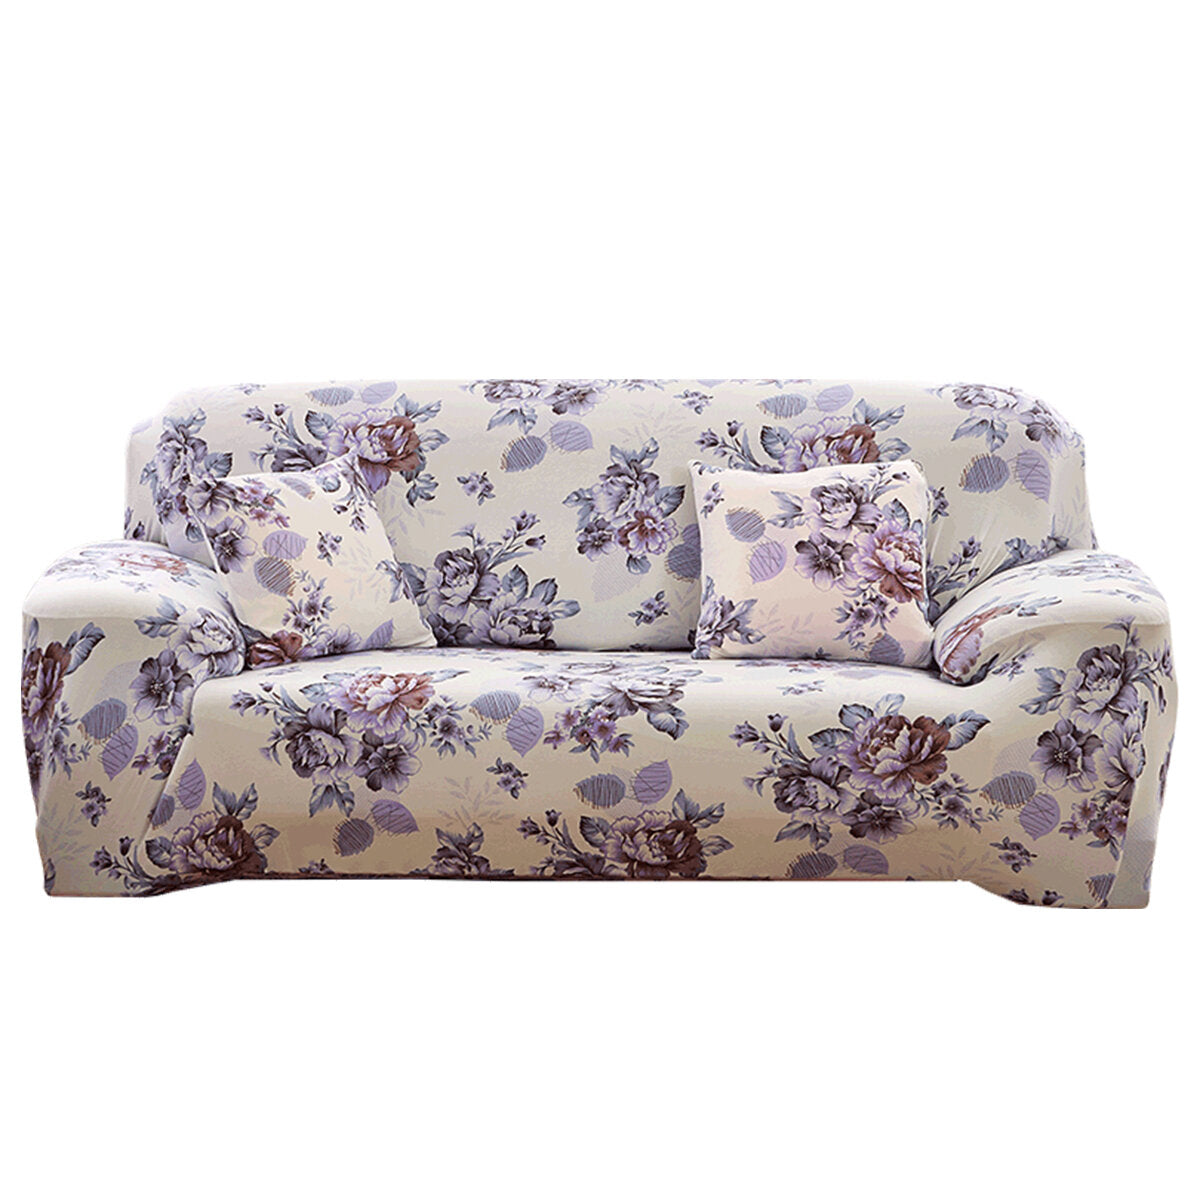 1/2/3/4 Seater Elastic Sofa Cover Pillowcase Chair Seat Protector Stretch Slipcover Home Office Furniture Accessories Decorations